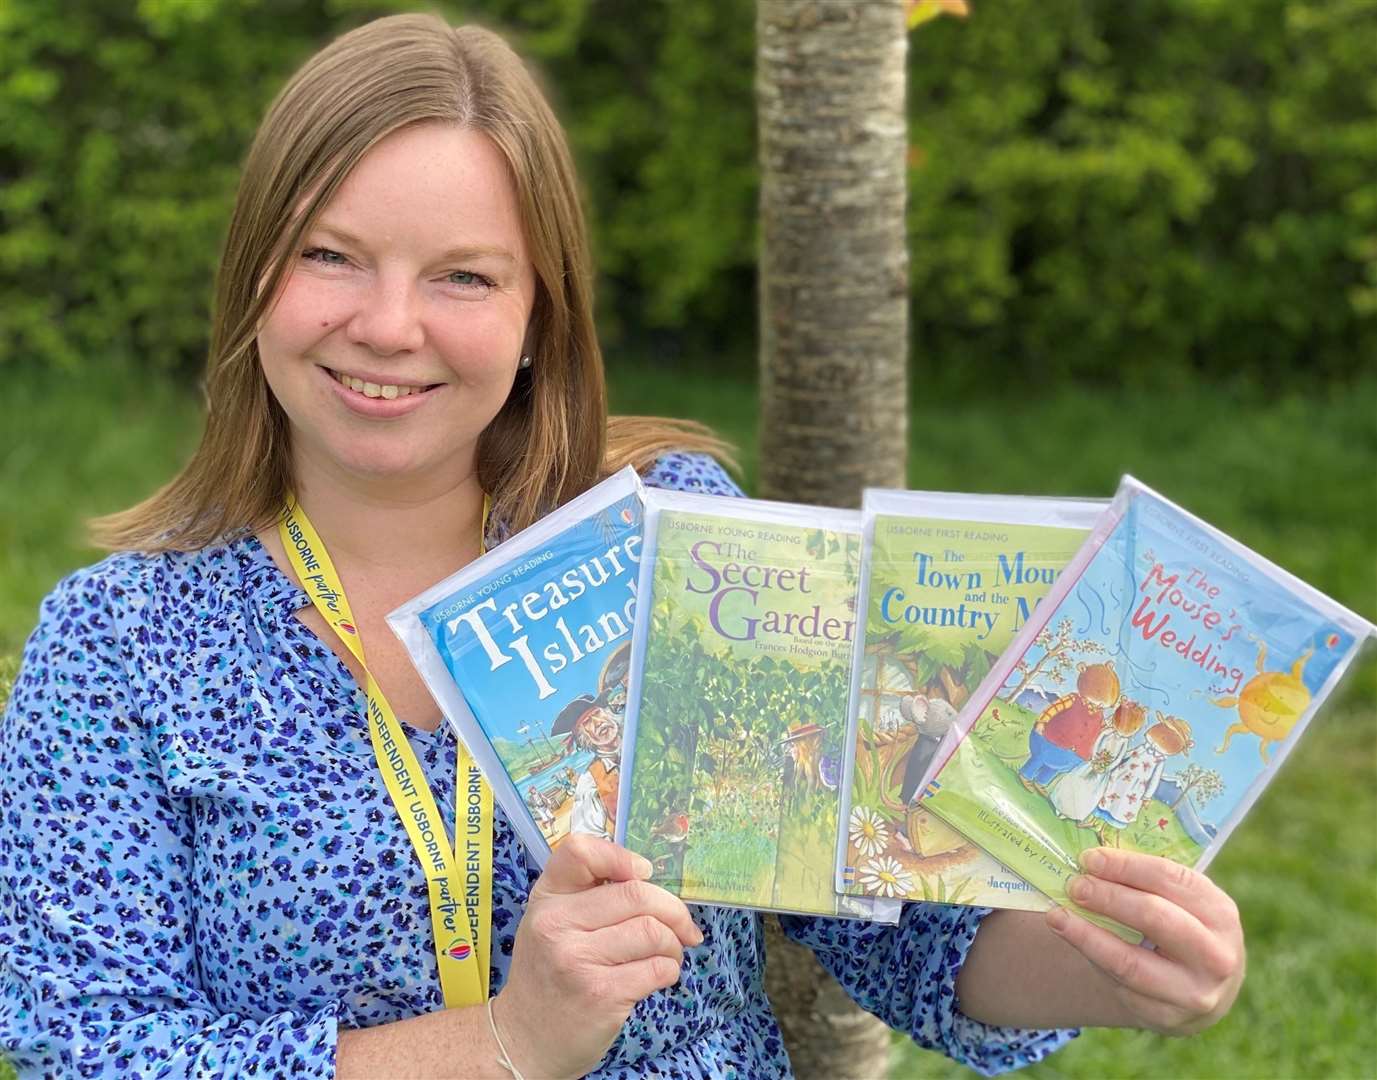 Mum of two, Kirsty Mullett, runs ‘Little Look for a Book’ in Maidstone